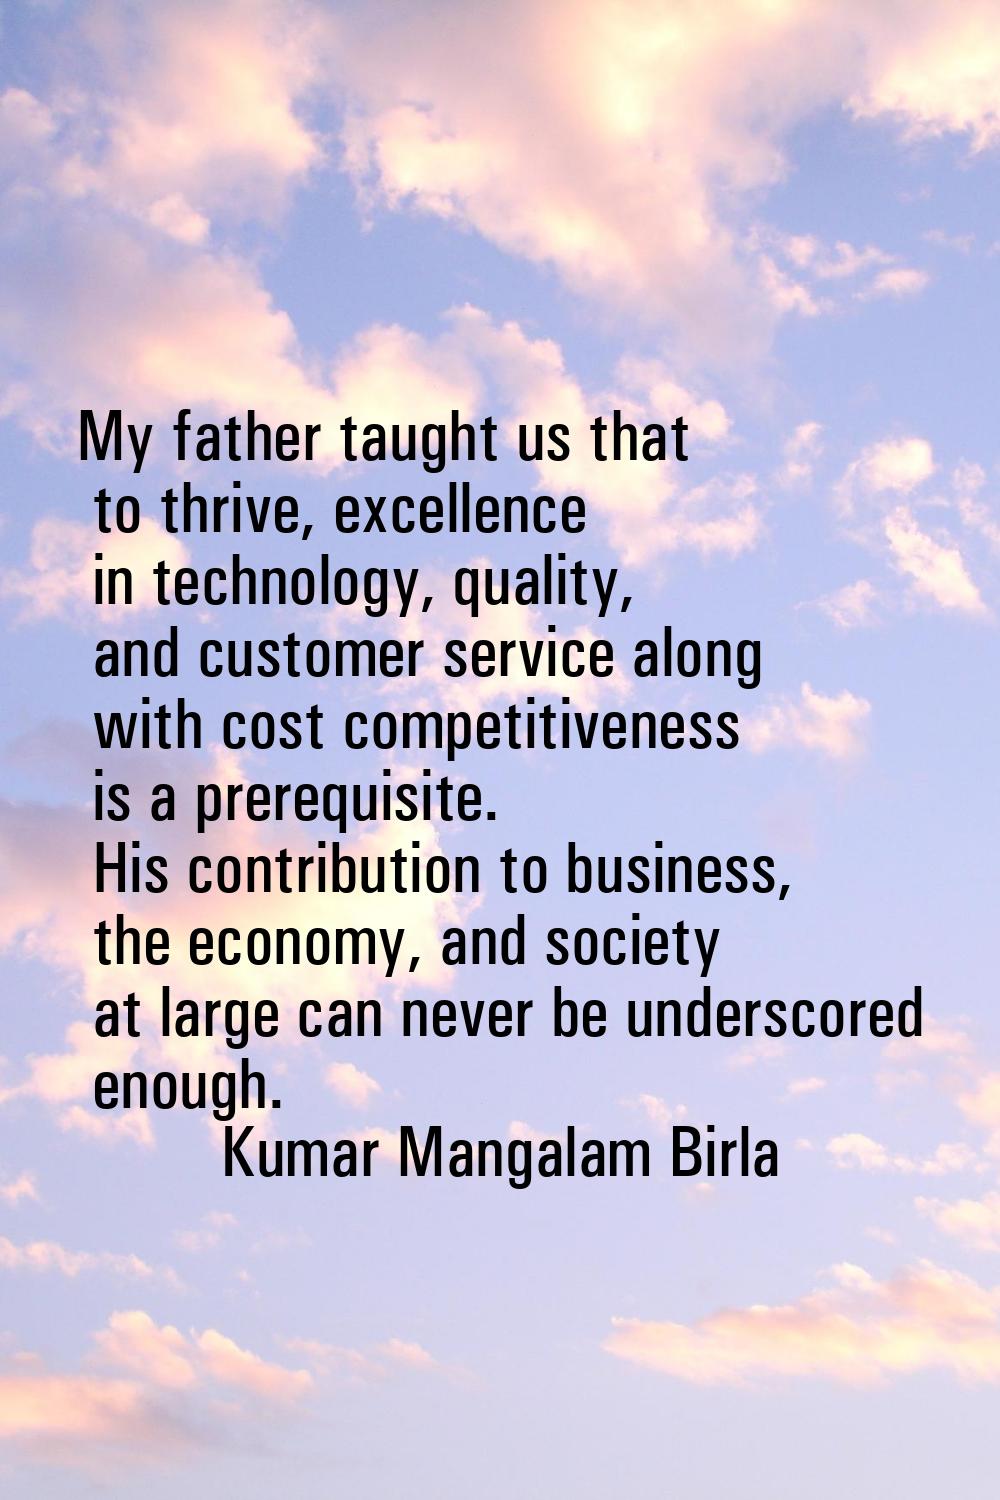 My father taught us that to thrive, excellence in technology, quality, and customer service along w